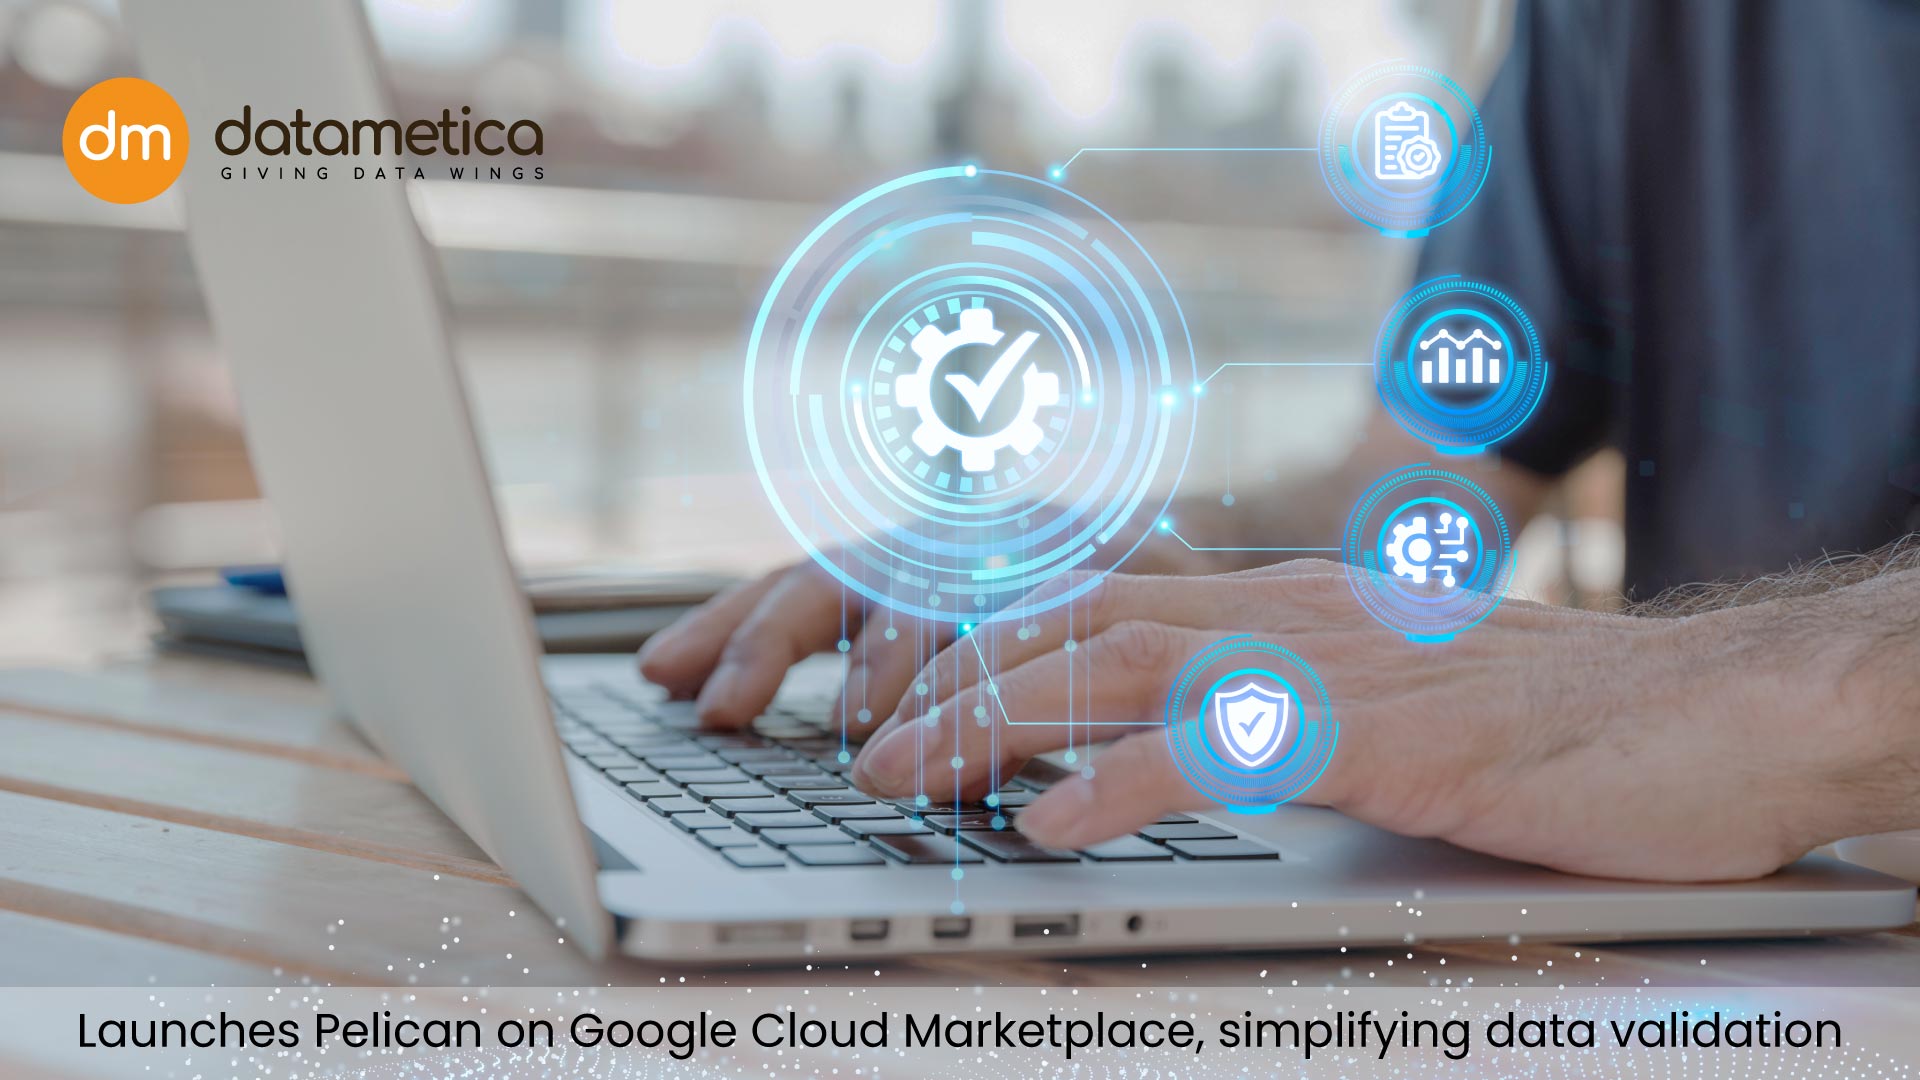 Simplifying Data Validation: Datametica Brings Pelican SaaS-based Technology to the Google Cloud Marketplace